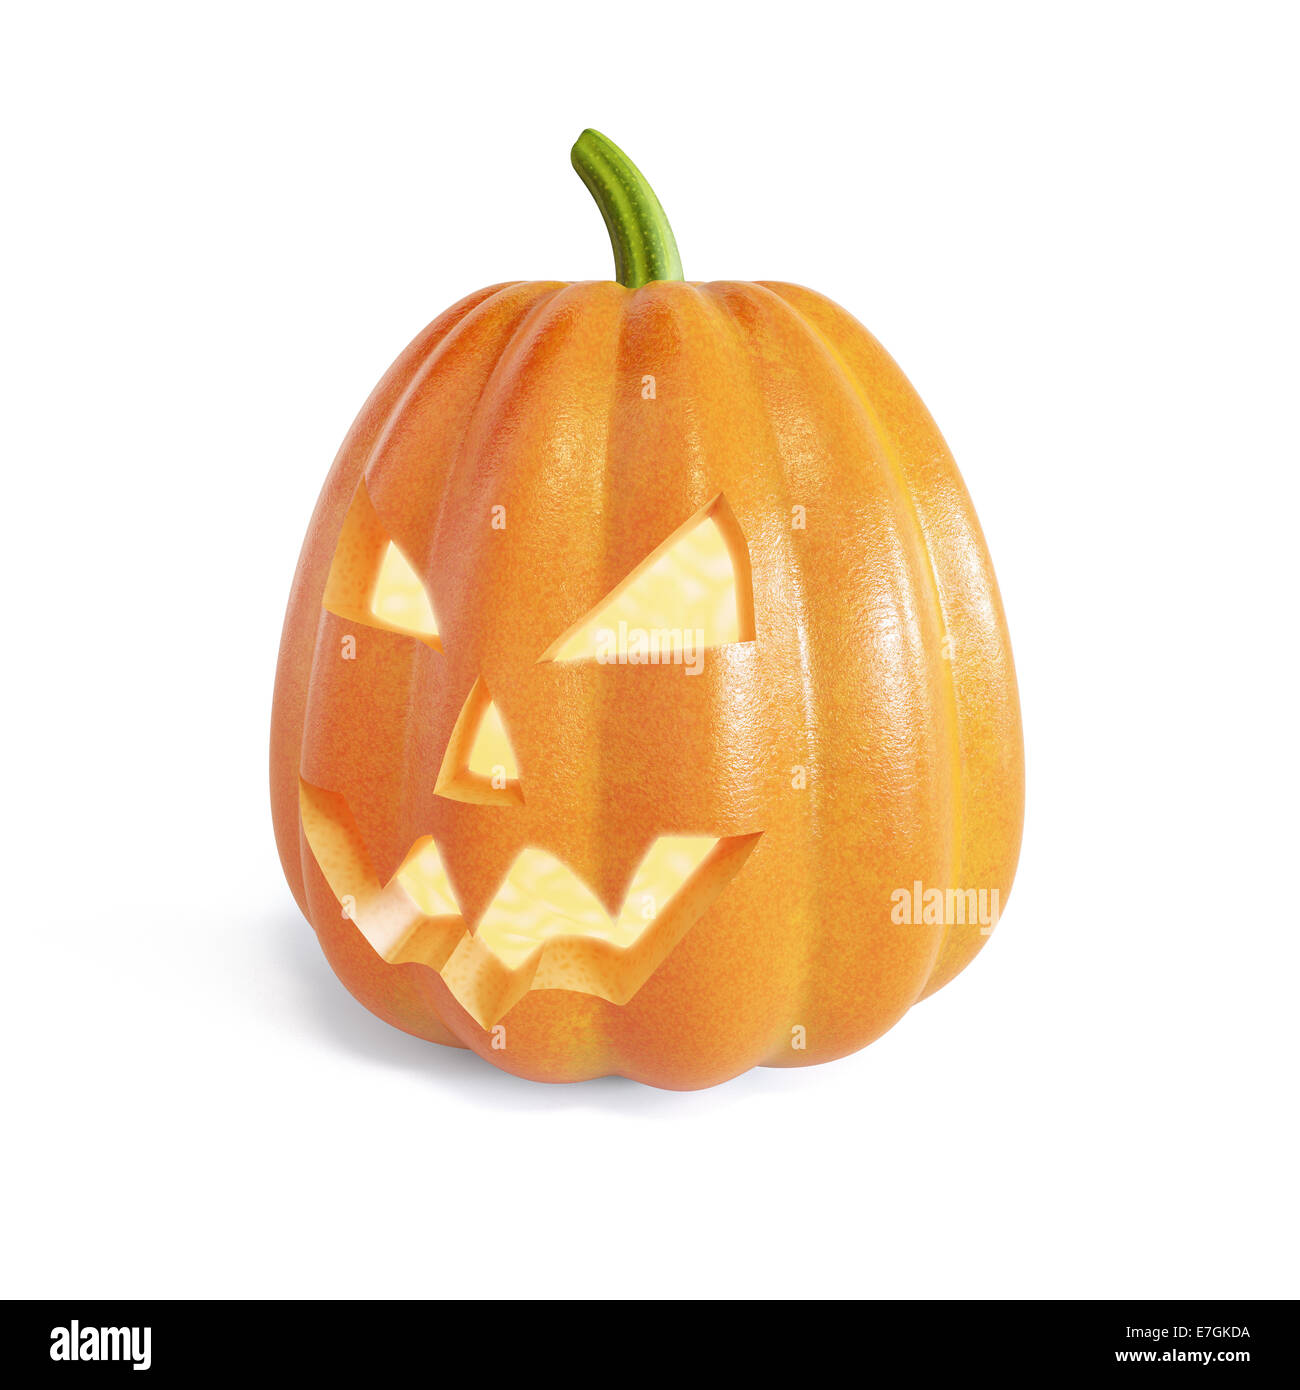 3d render of the Jack O Lantern halloween pumpkin with candle light inside. Isolated on white background Stock Photo